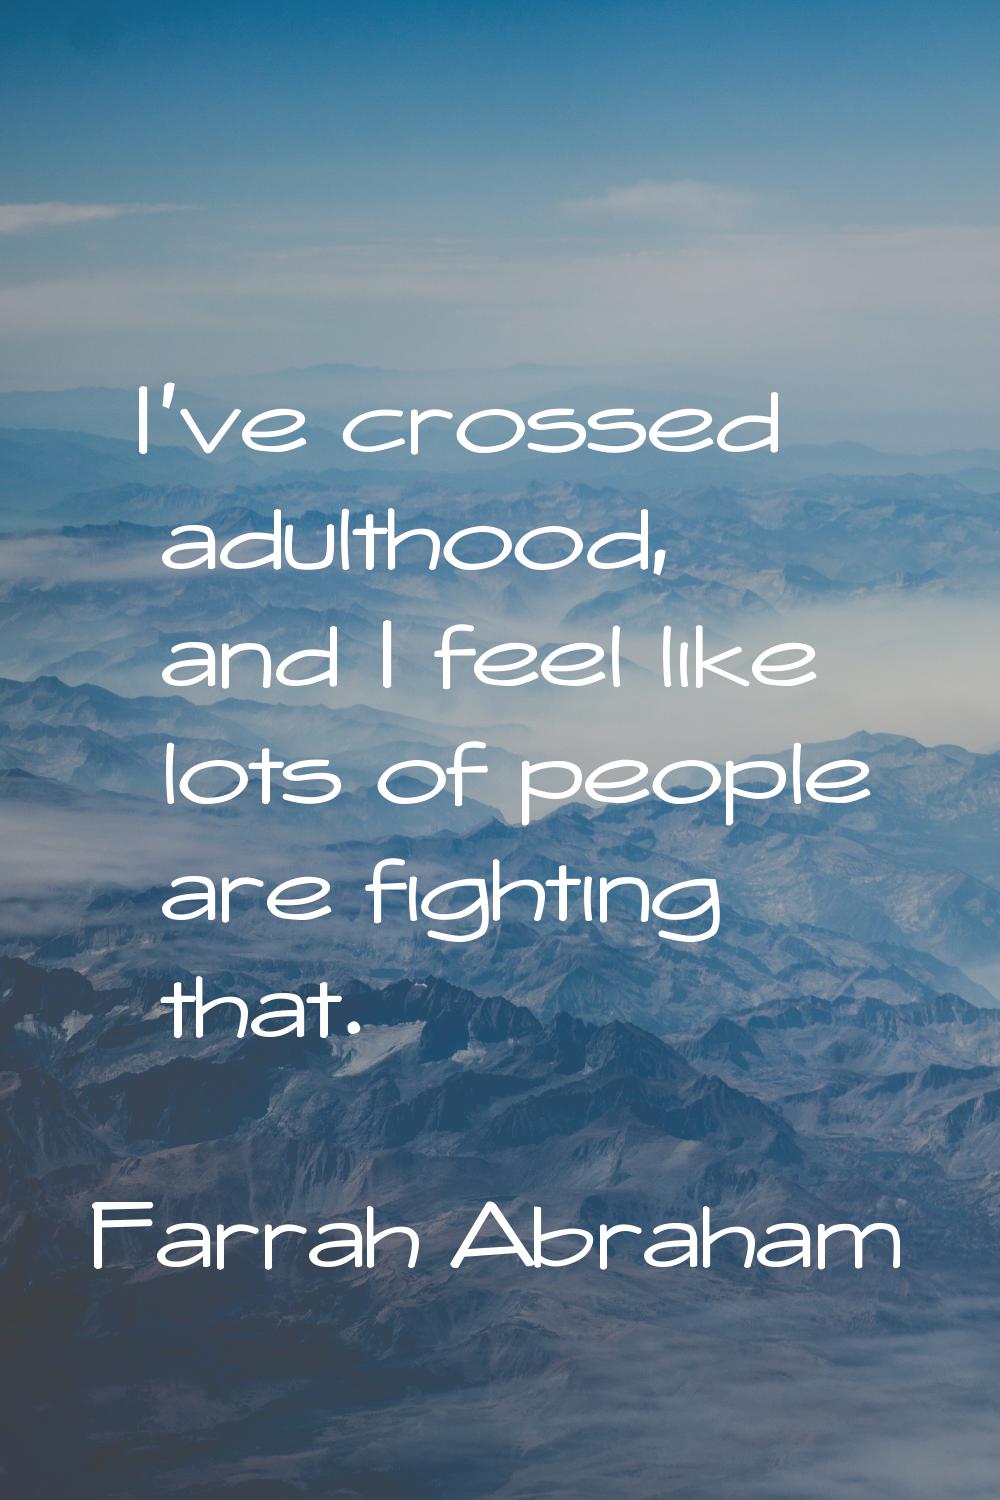 I've crossed adulthood, and I feel like lots of people are fighting that.